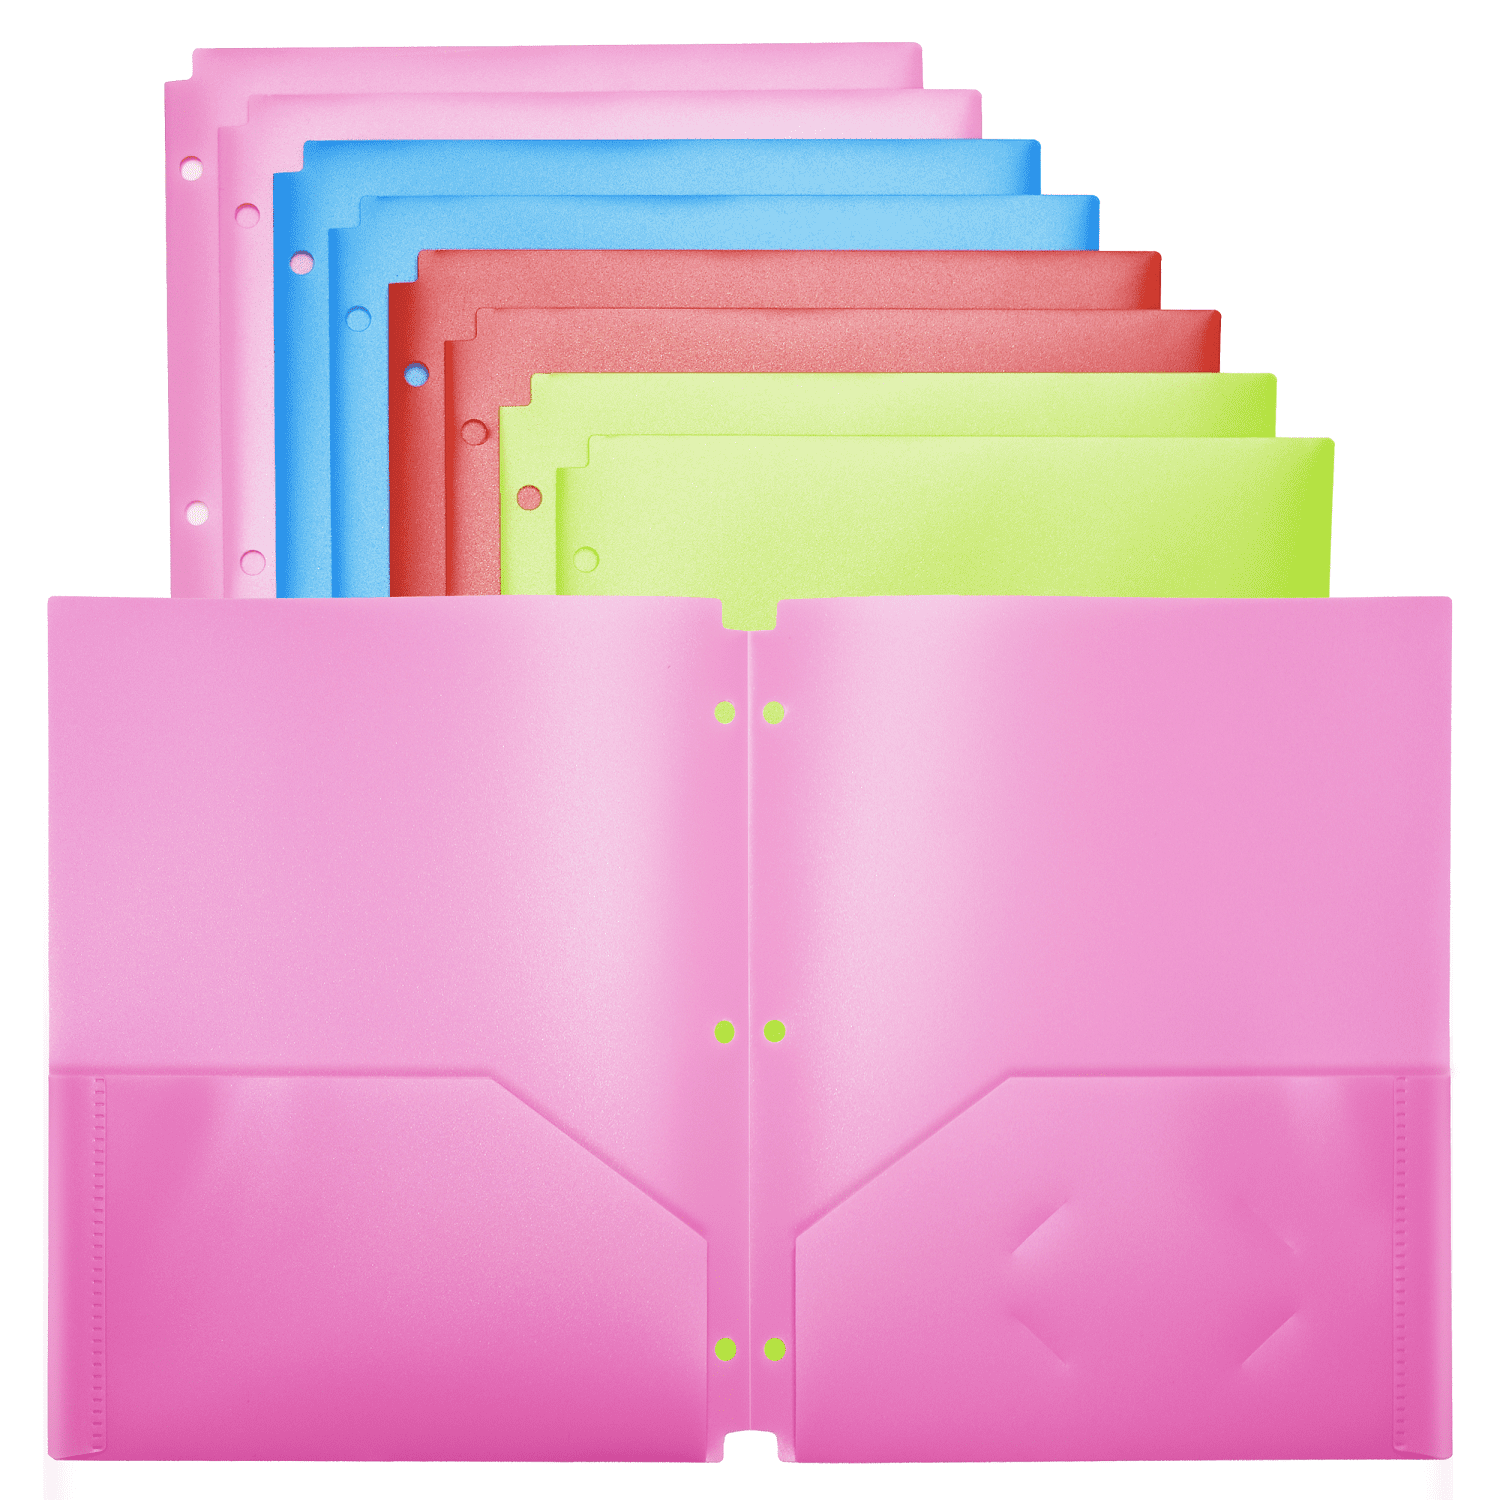 2 Pocket Paper Folders, Letter Size Paper Portfolios by Better Office Products, Case of 100, Assorted Primary Colors